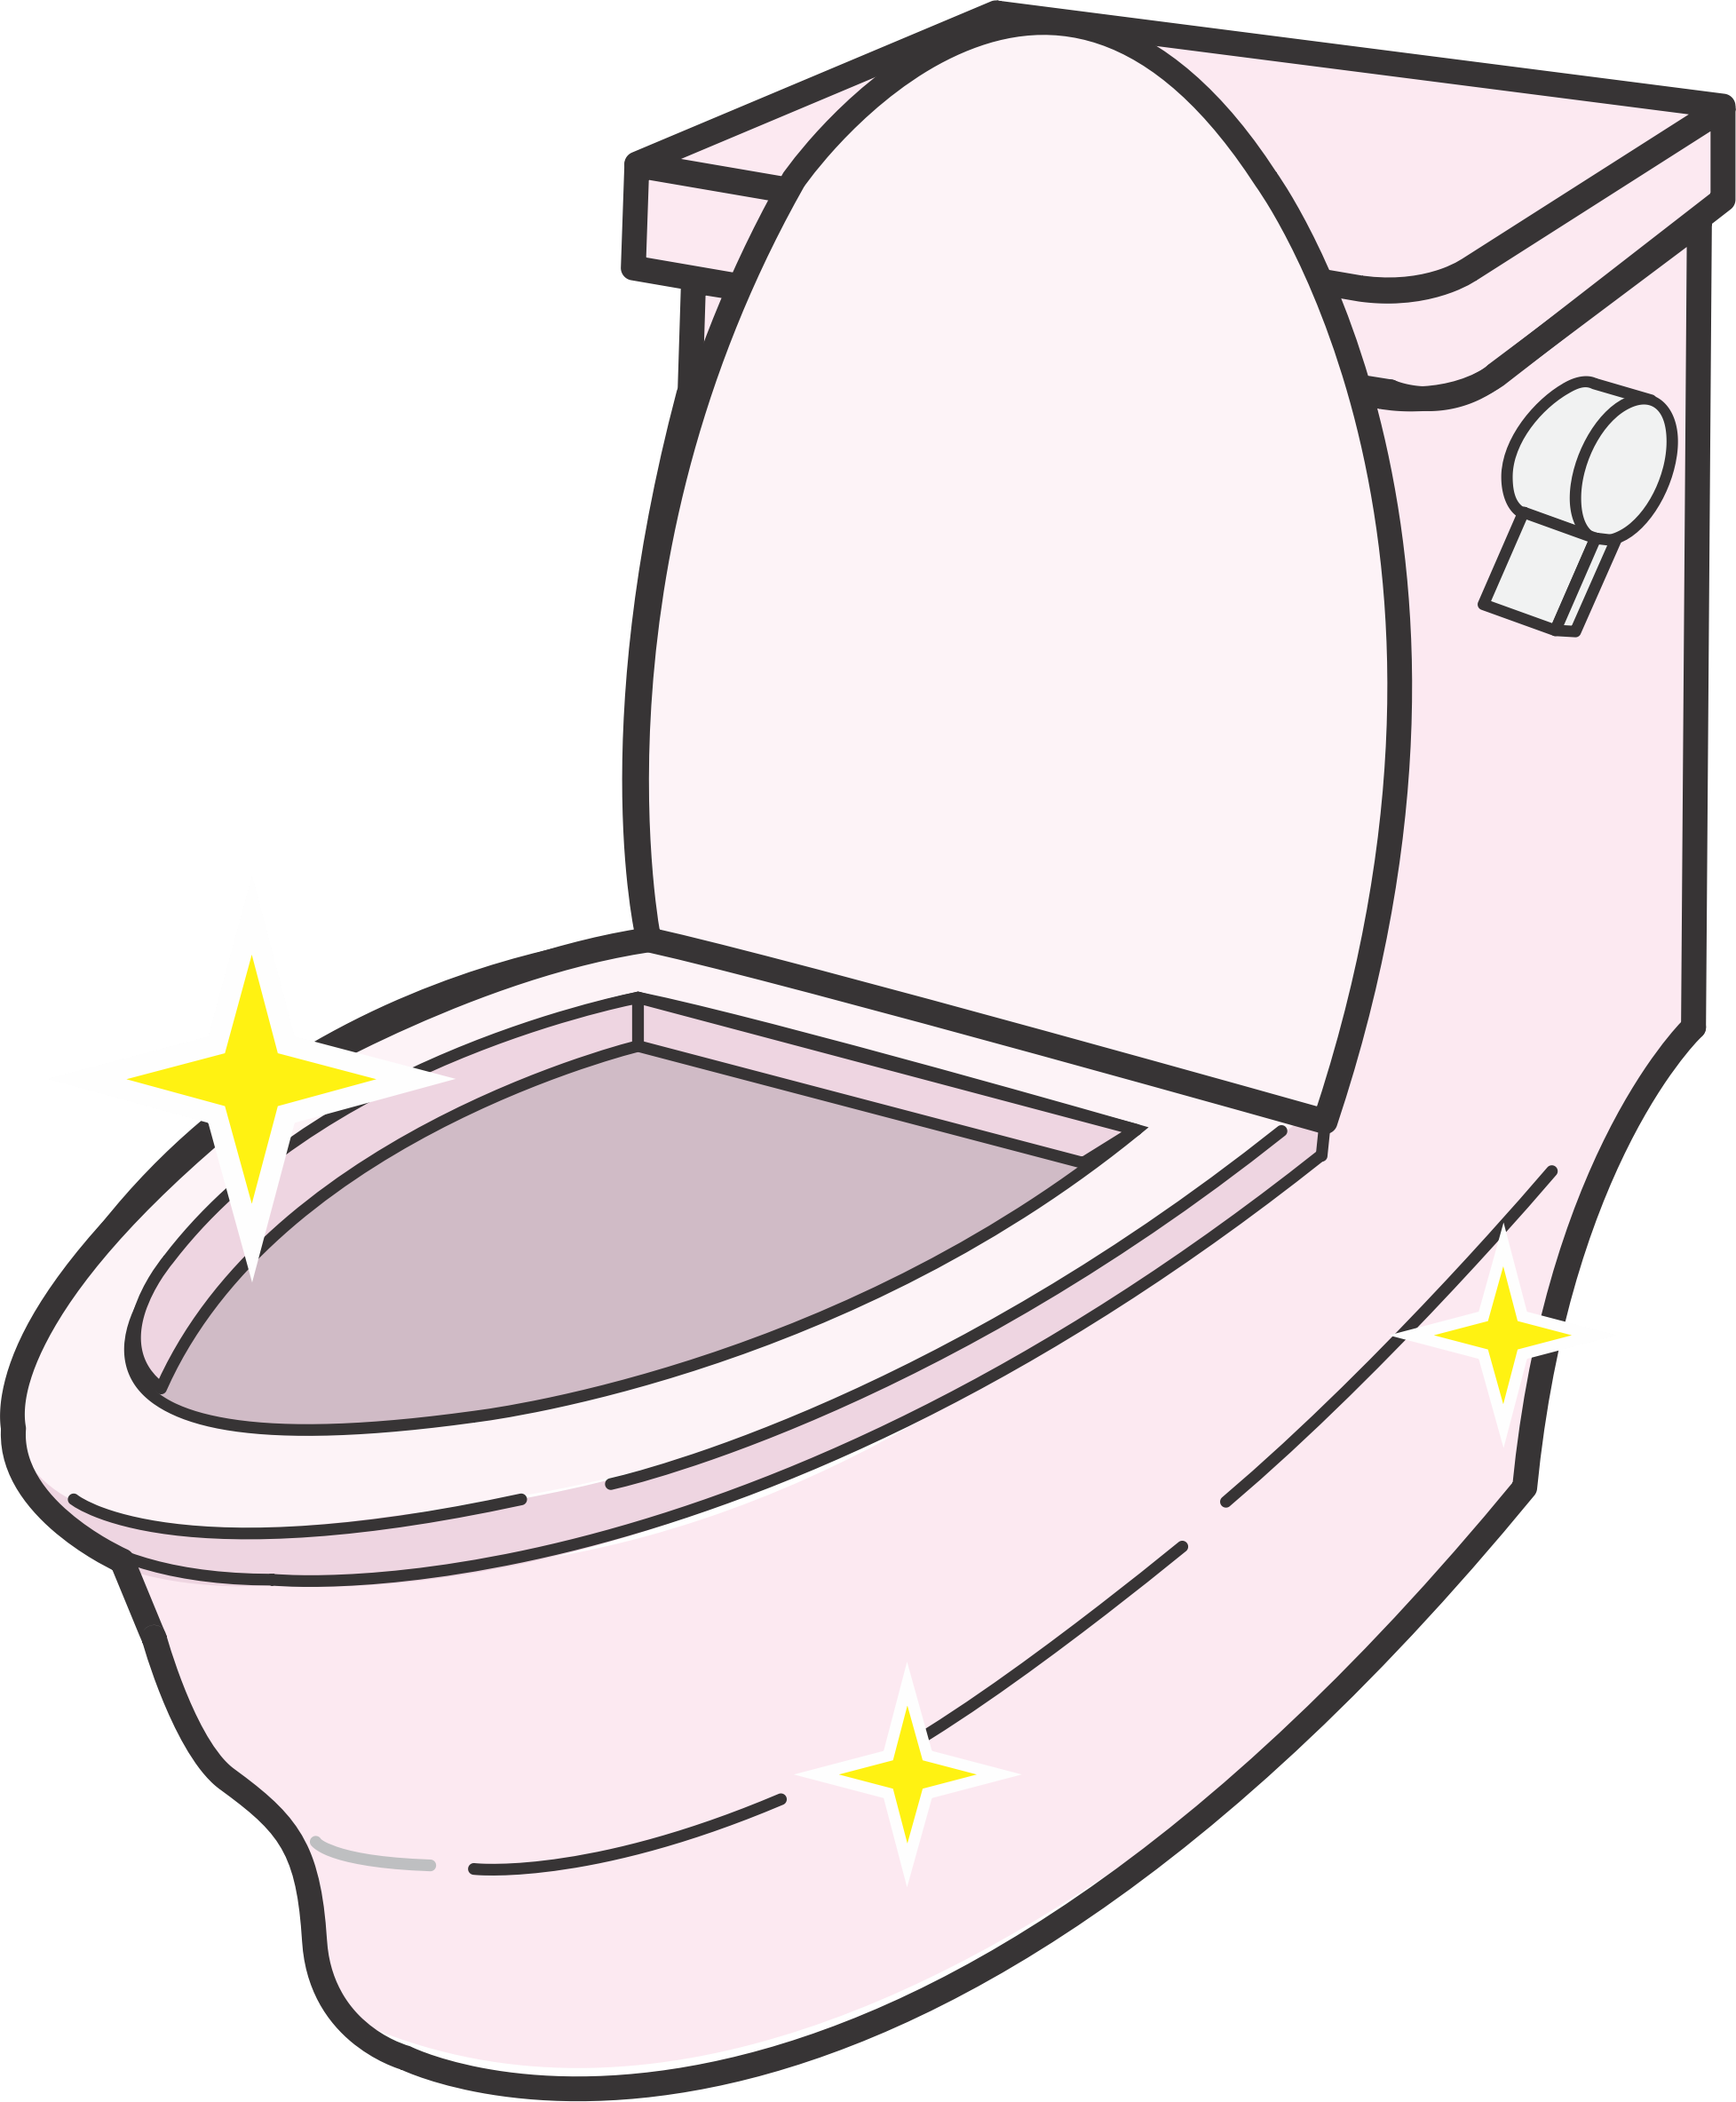 Cleaning clipart sparkling. Clean toilet big image